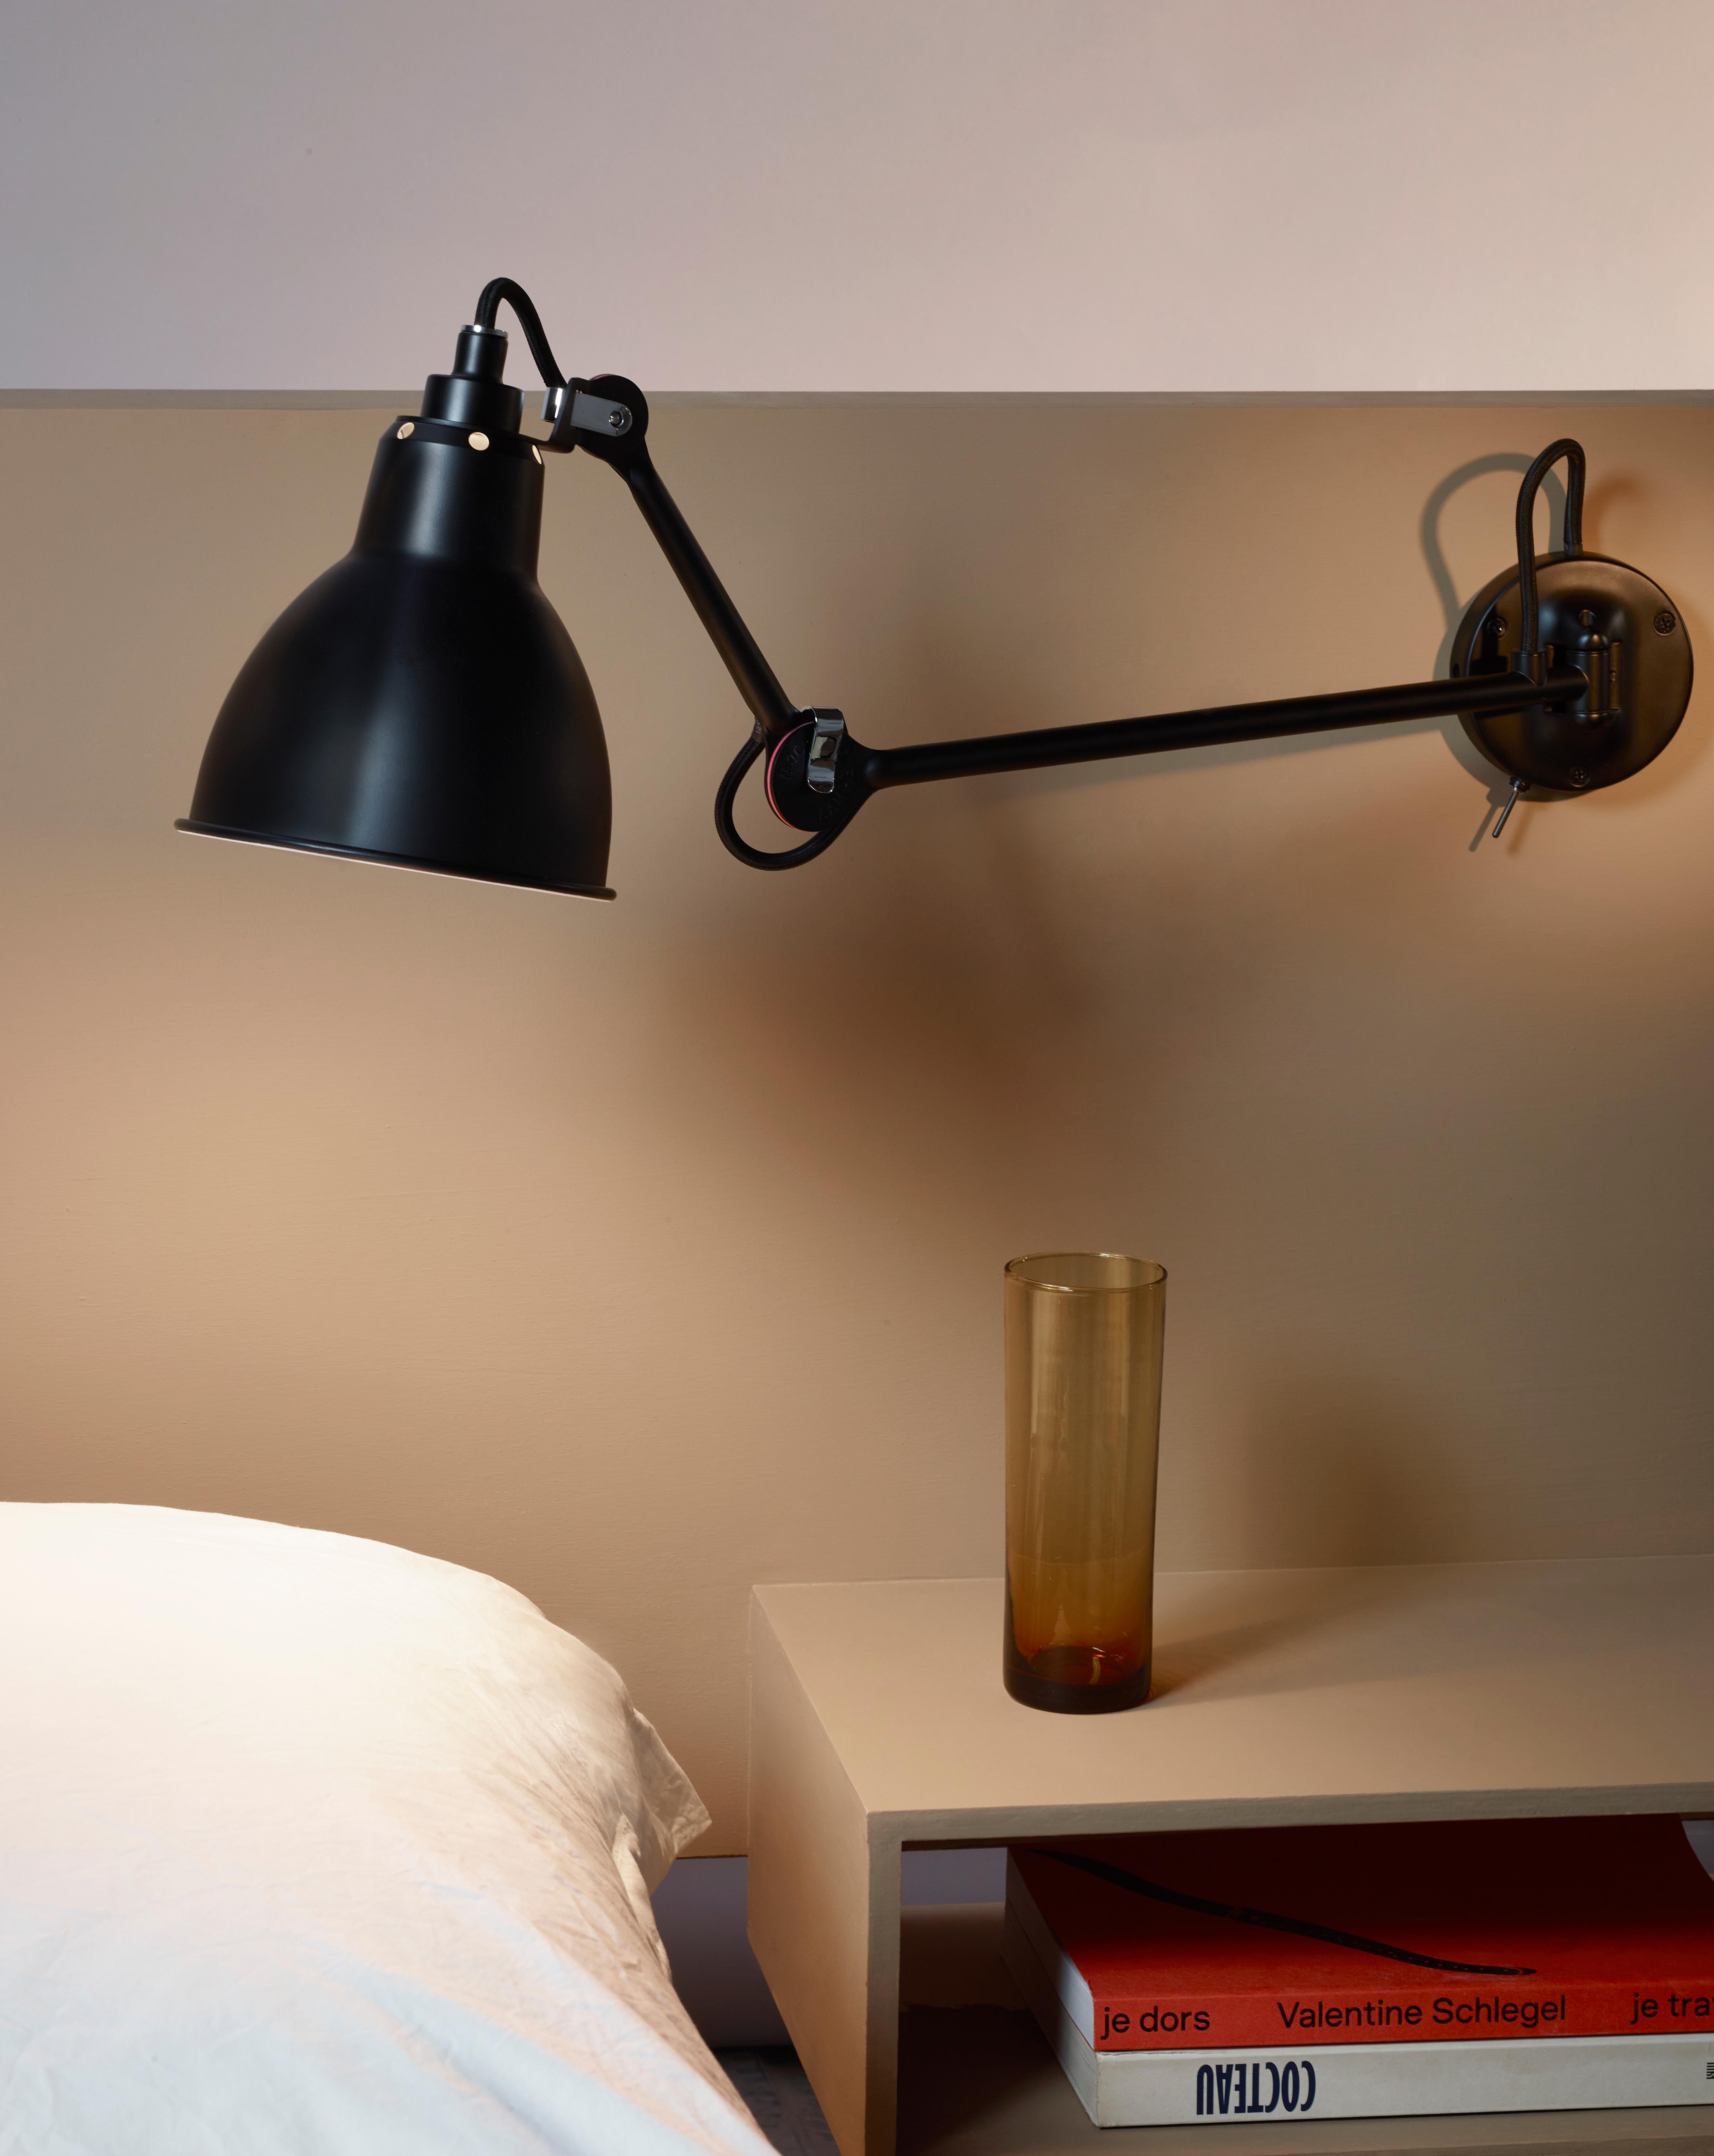 DCW Editions Lampe Gras N°204 SW Wall Lamp in Black Steel Arm and Raw Copper Shade by Bernard-Albin Gras
 
 In 1921 Bernard-Albin GRAS designed a series of lamps for use in offices and in industrial environments. The GRAS lamp, as it was